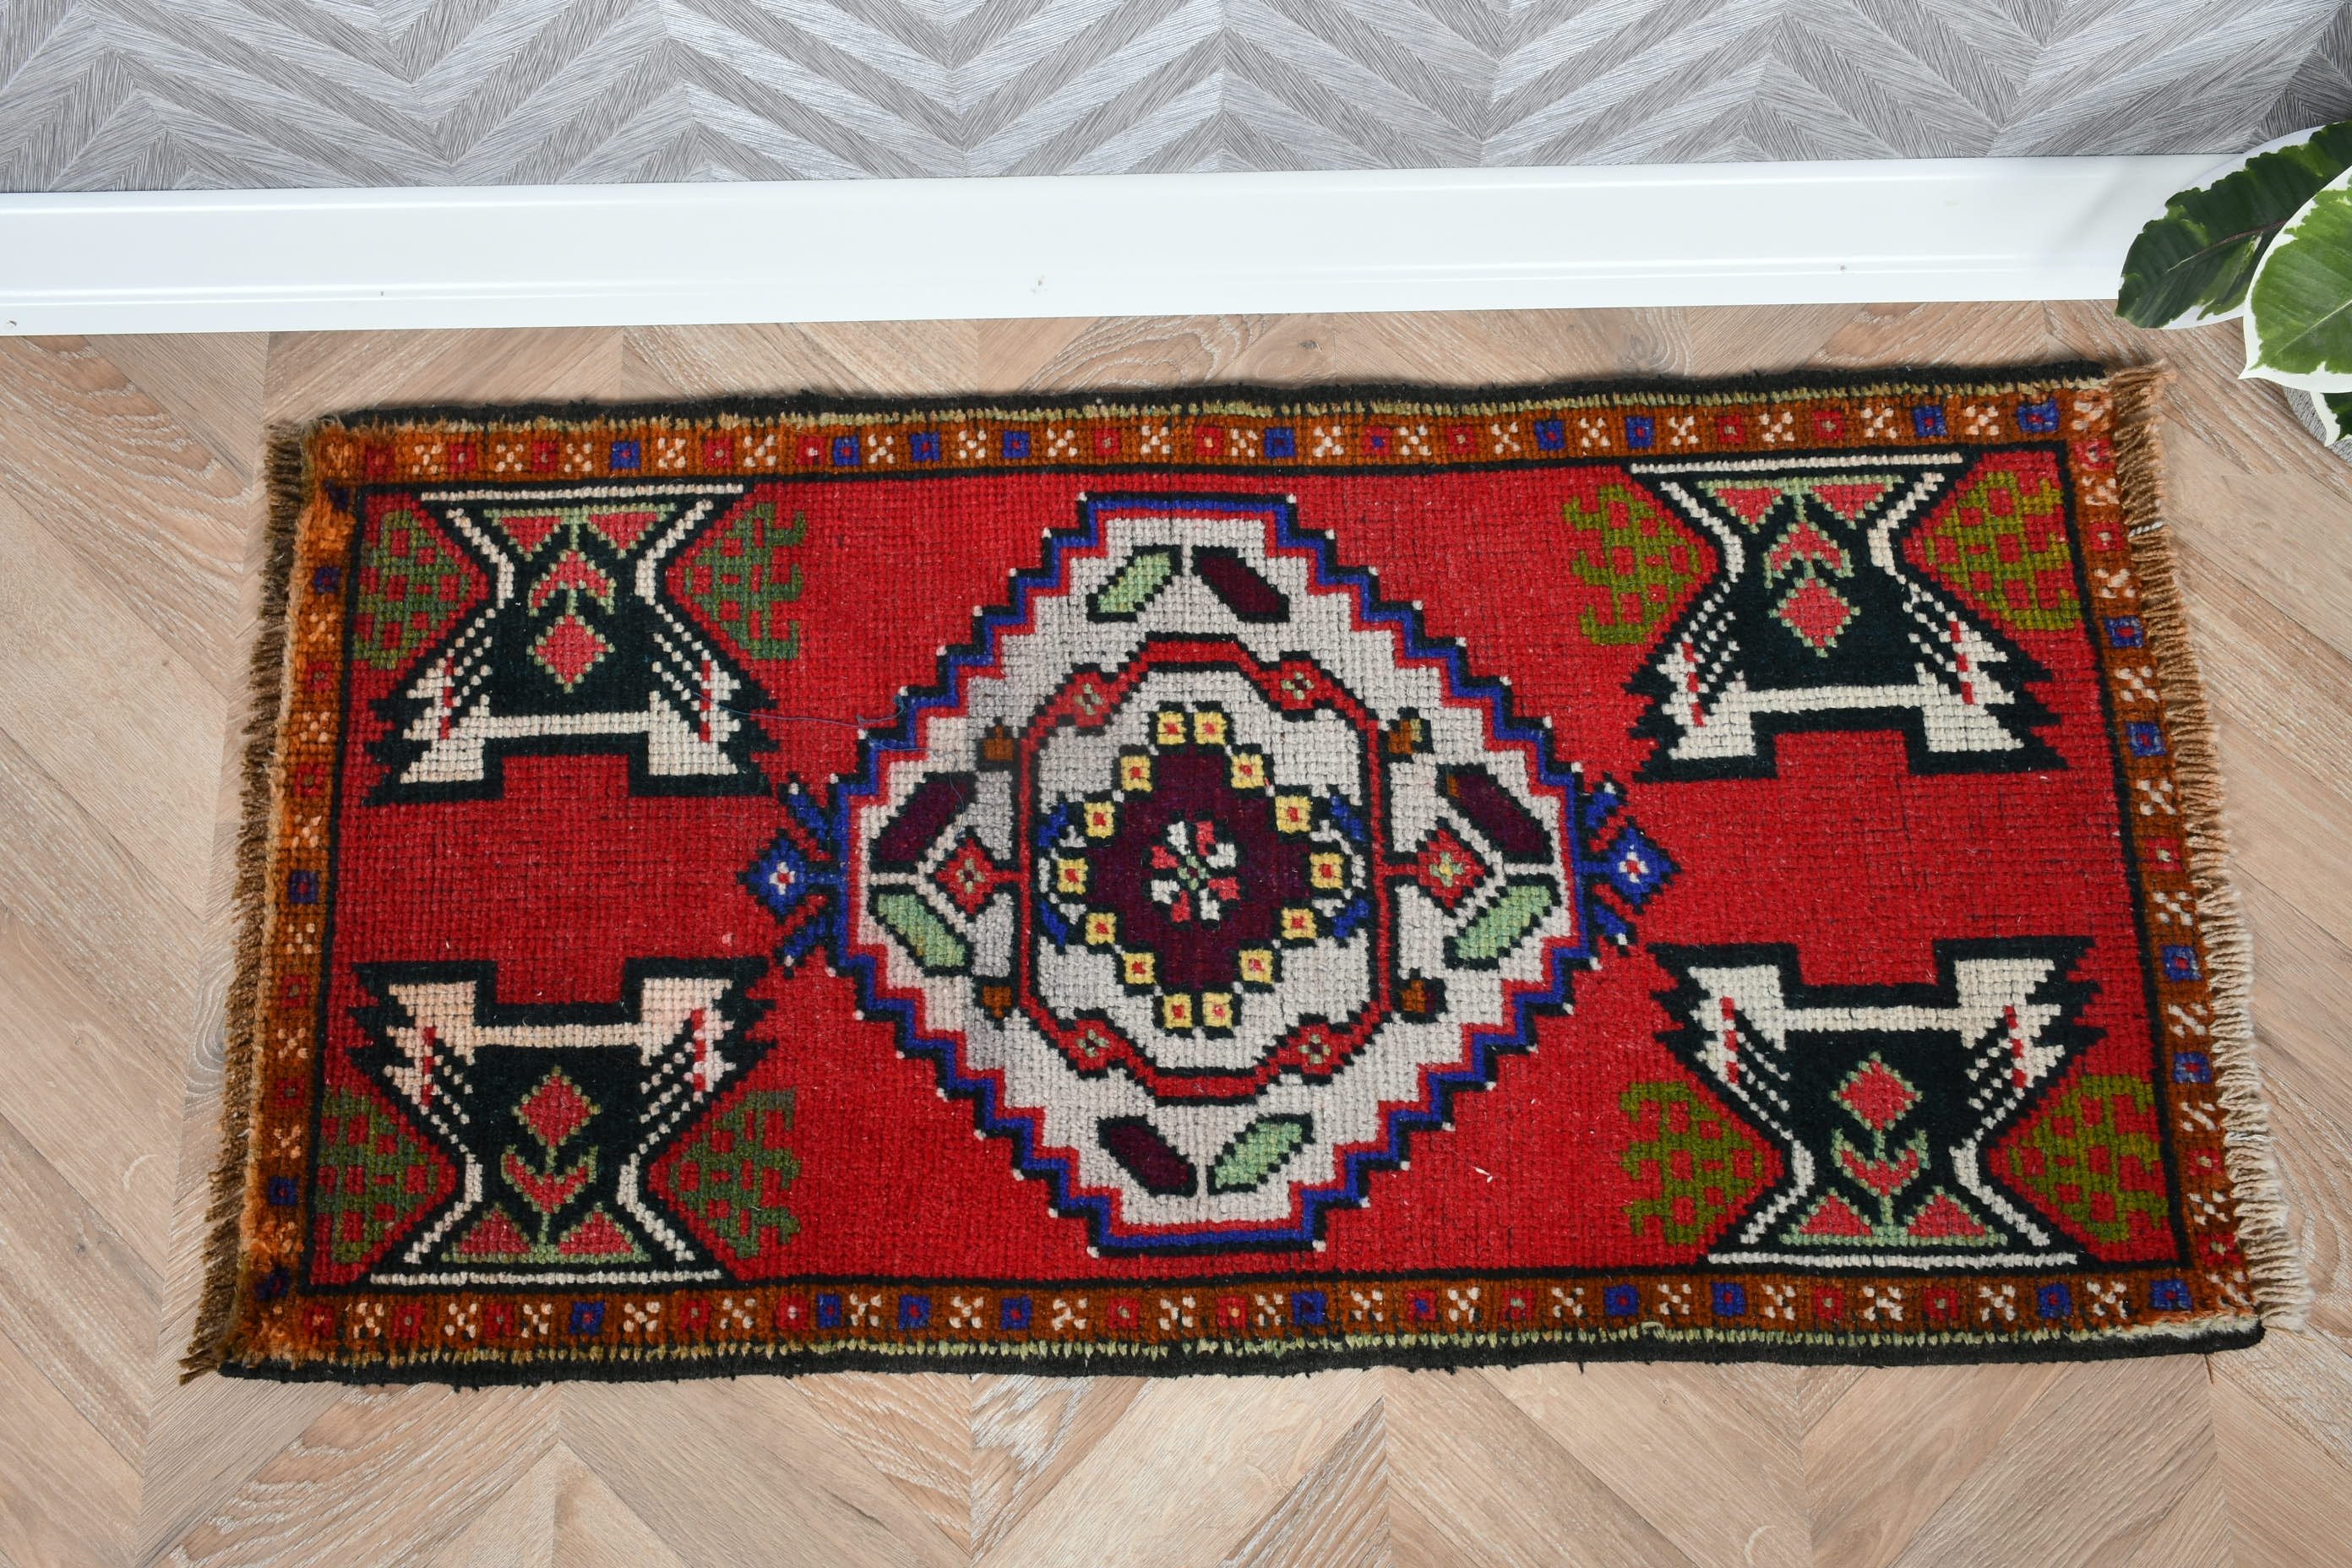 Bath Rugs, Oushak Rugs, Rugs for Car Mat, Entry Rugs, Vintage Rugs, Turkish Rug, Red  1.6x3.1 ft Small Rug